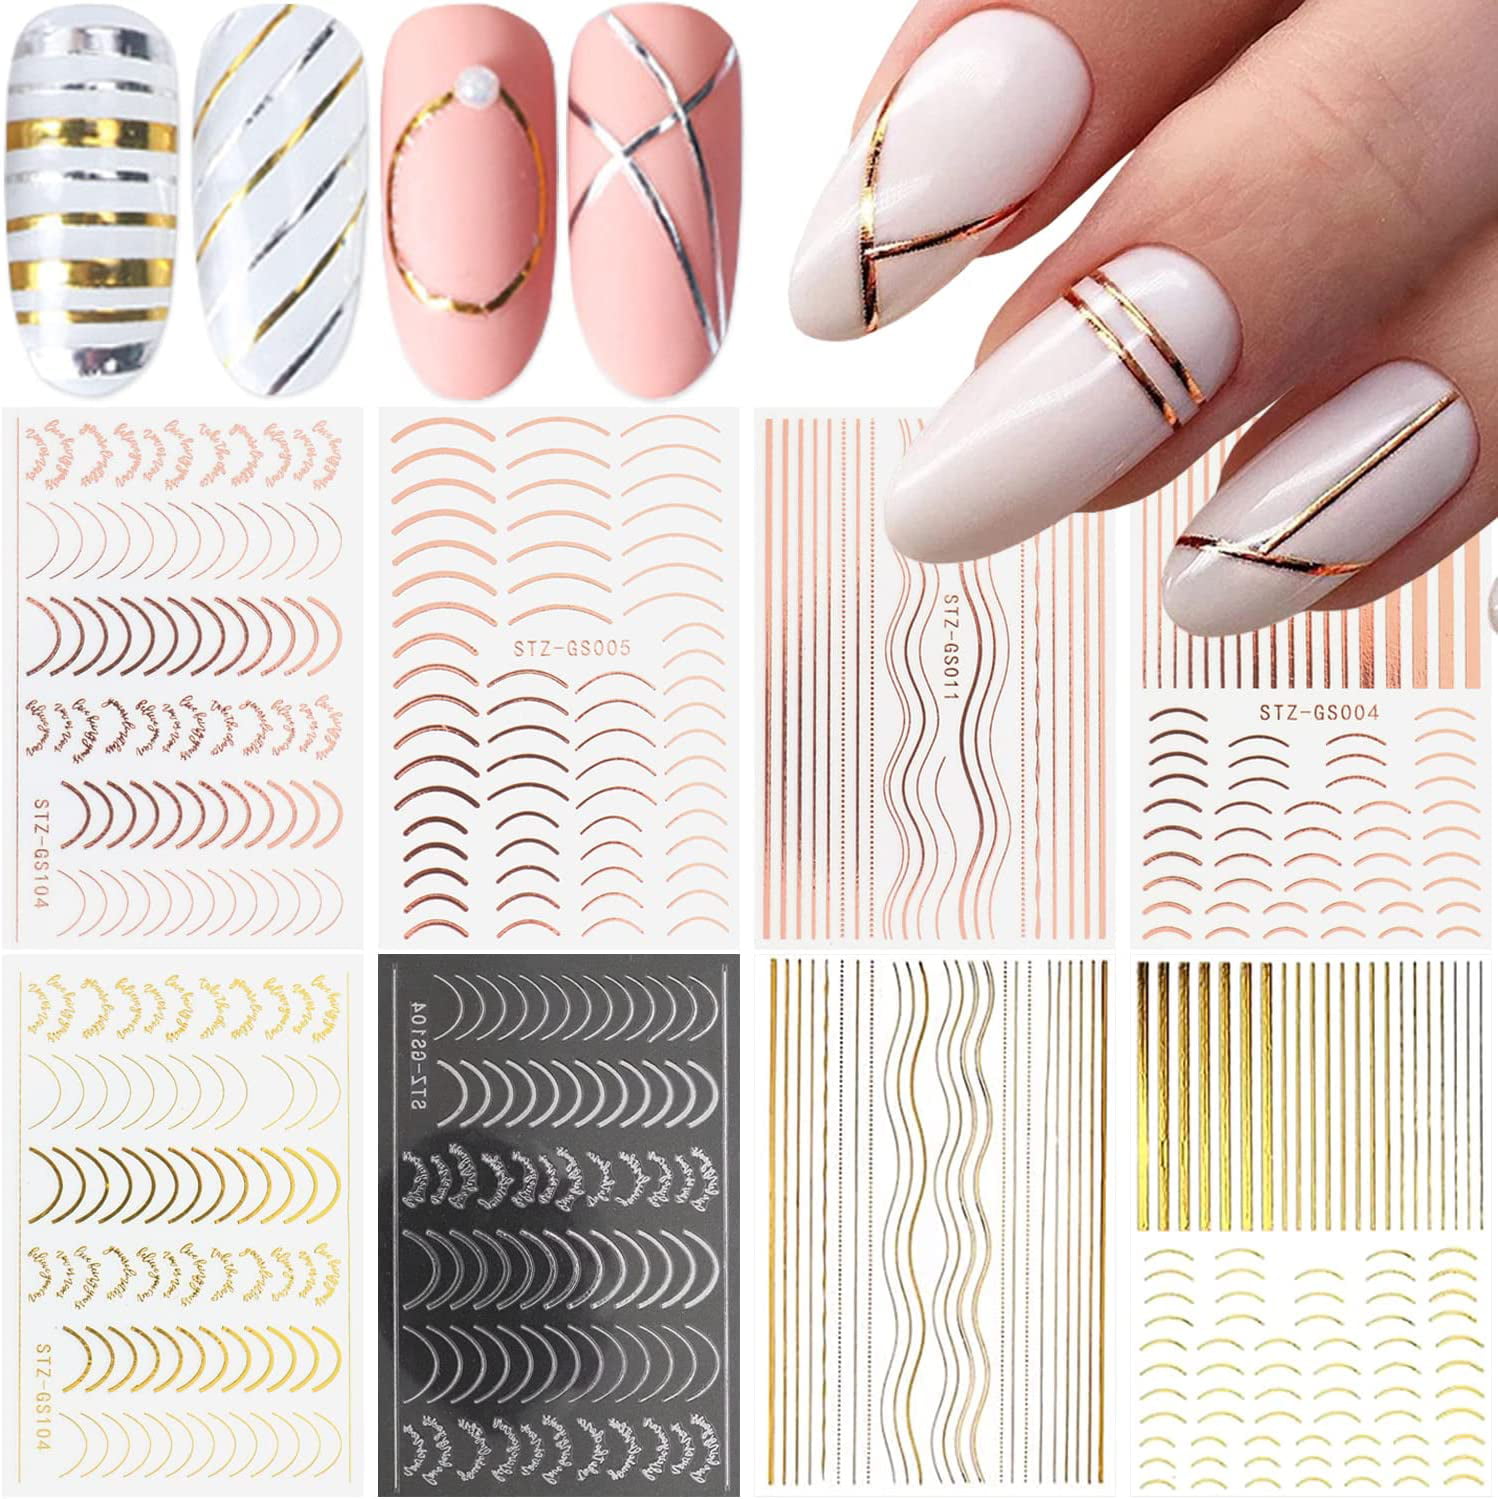 30 Rose Gold Nail Art Ideas That Will Definitely Look Perfect For Holidays!